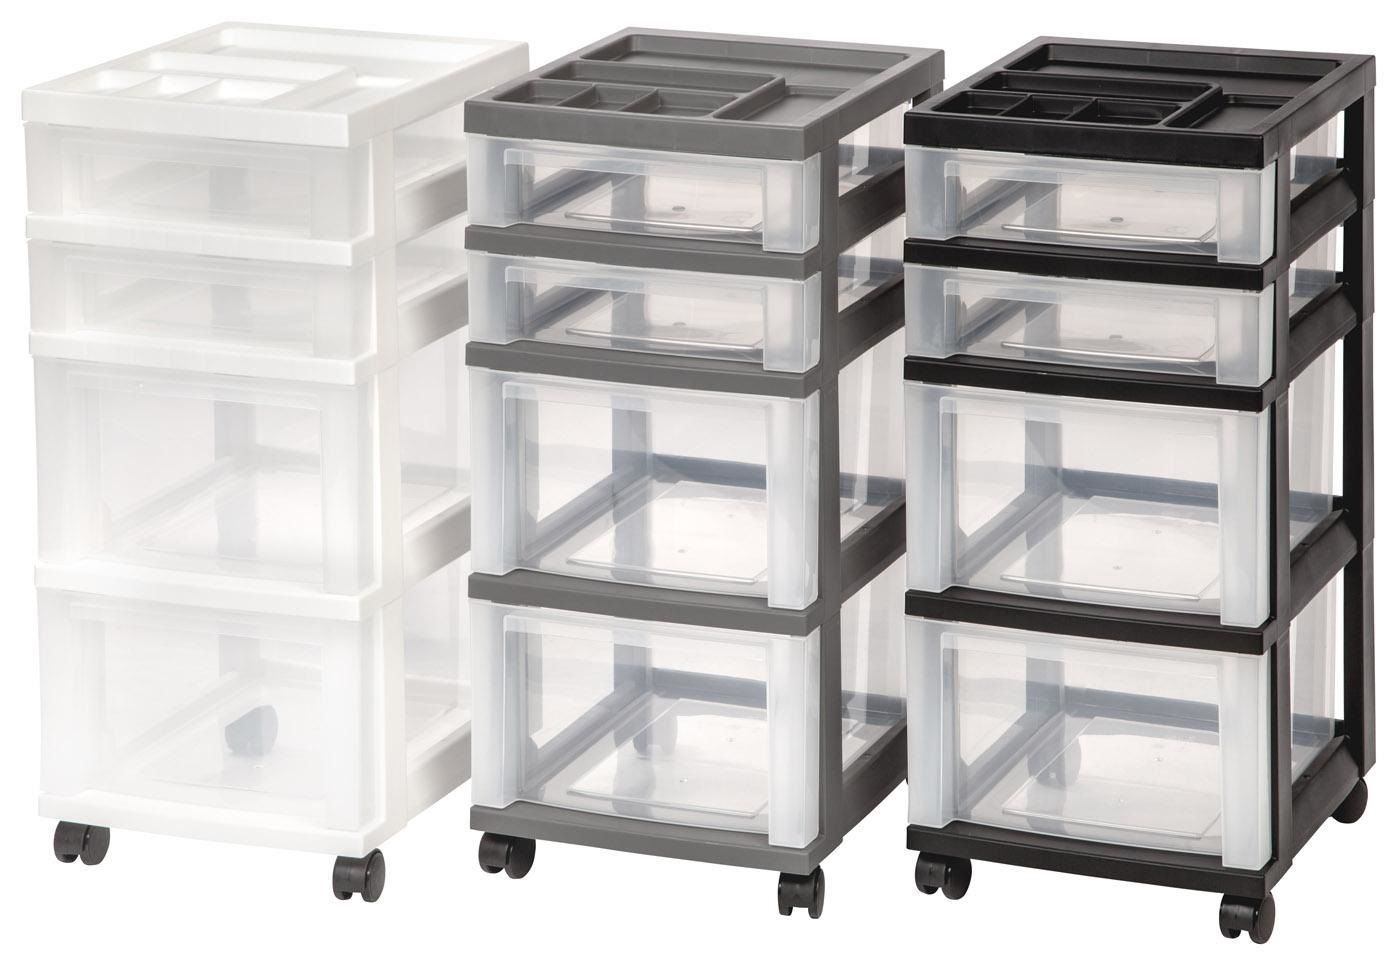 Primary image for 4-Drawer Cart with Organizer, Casters, Storage, Room, House,Office,Shelves, Rack